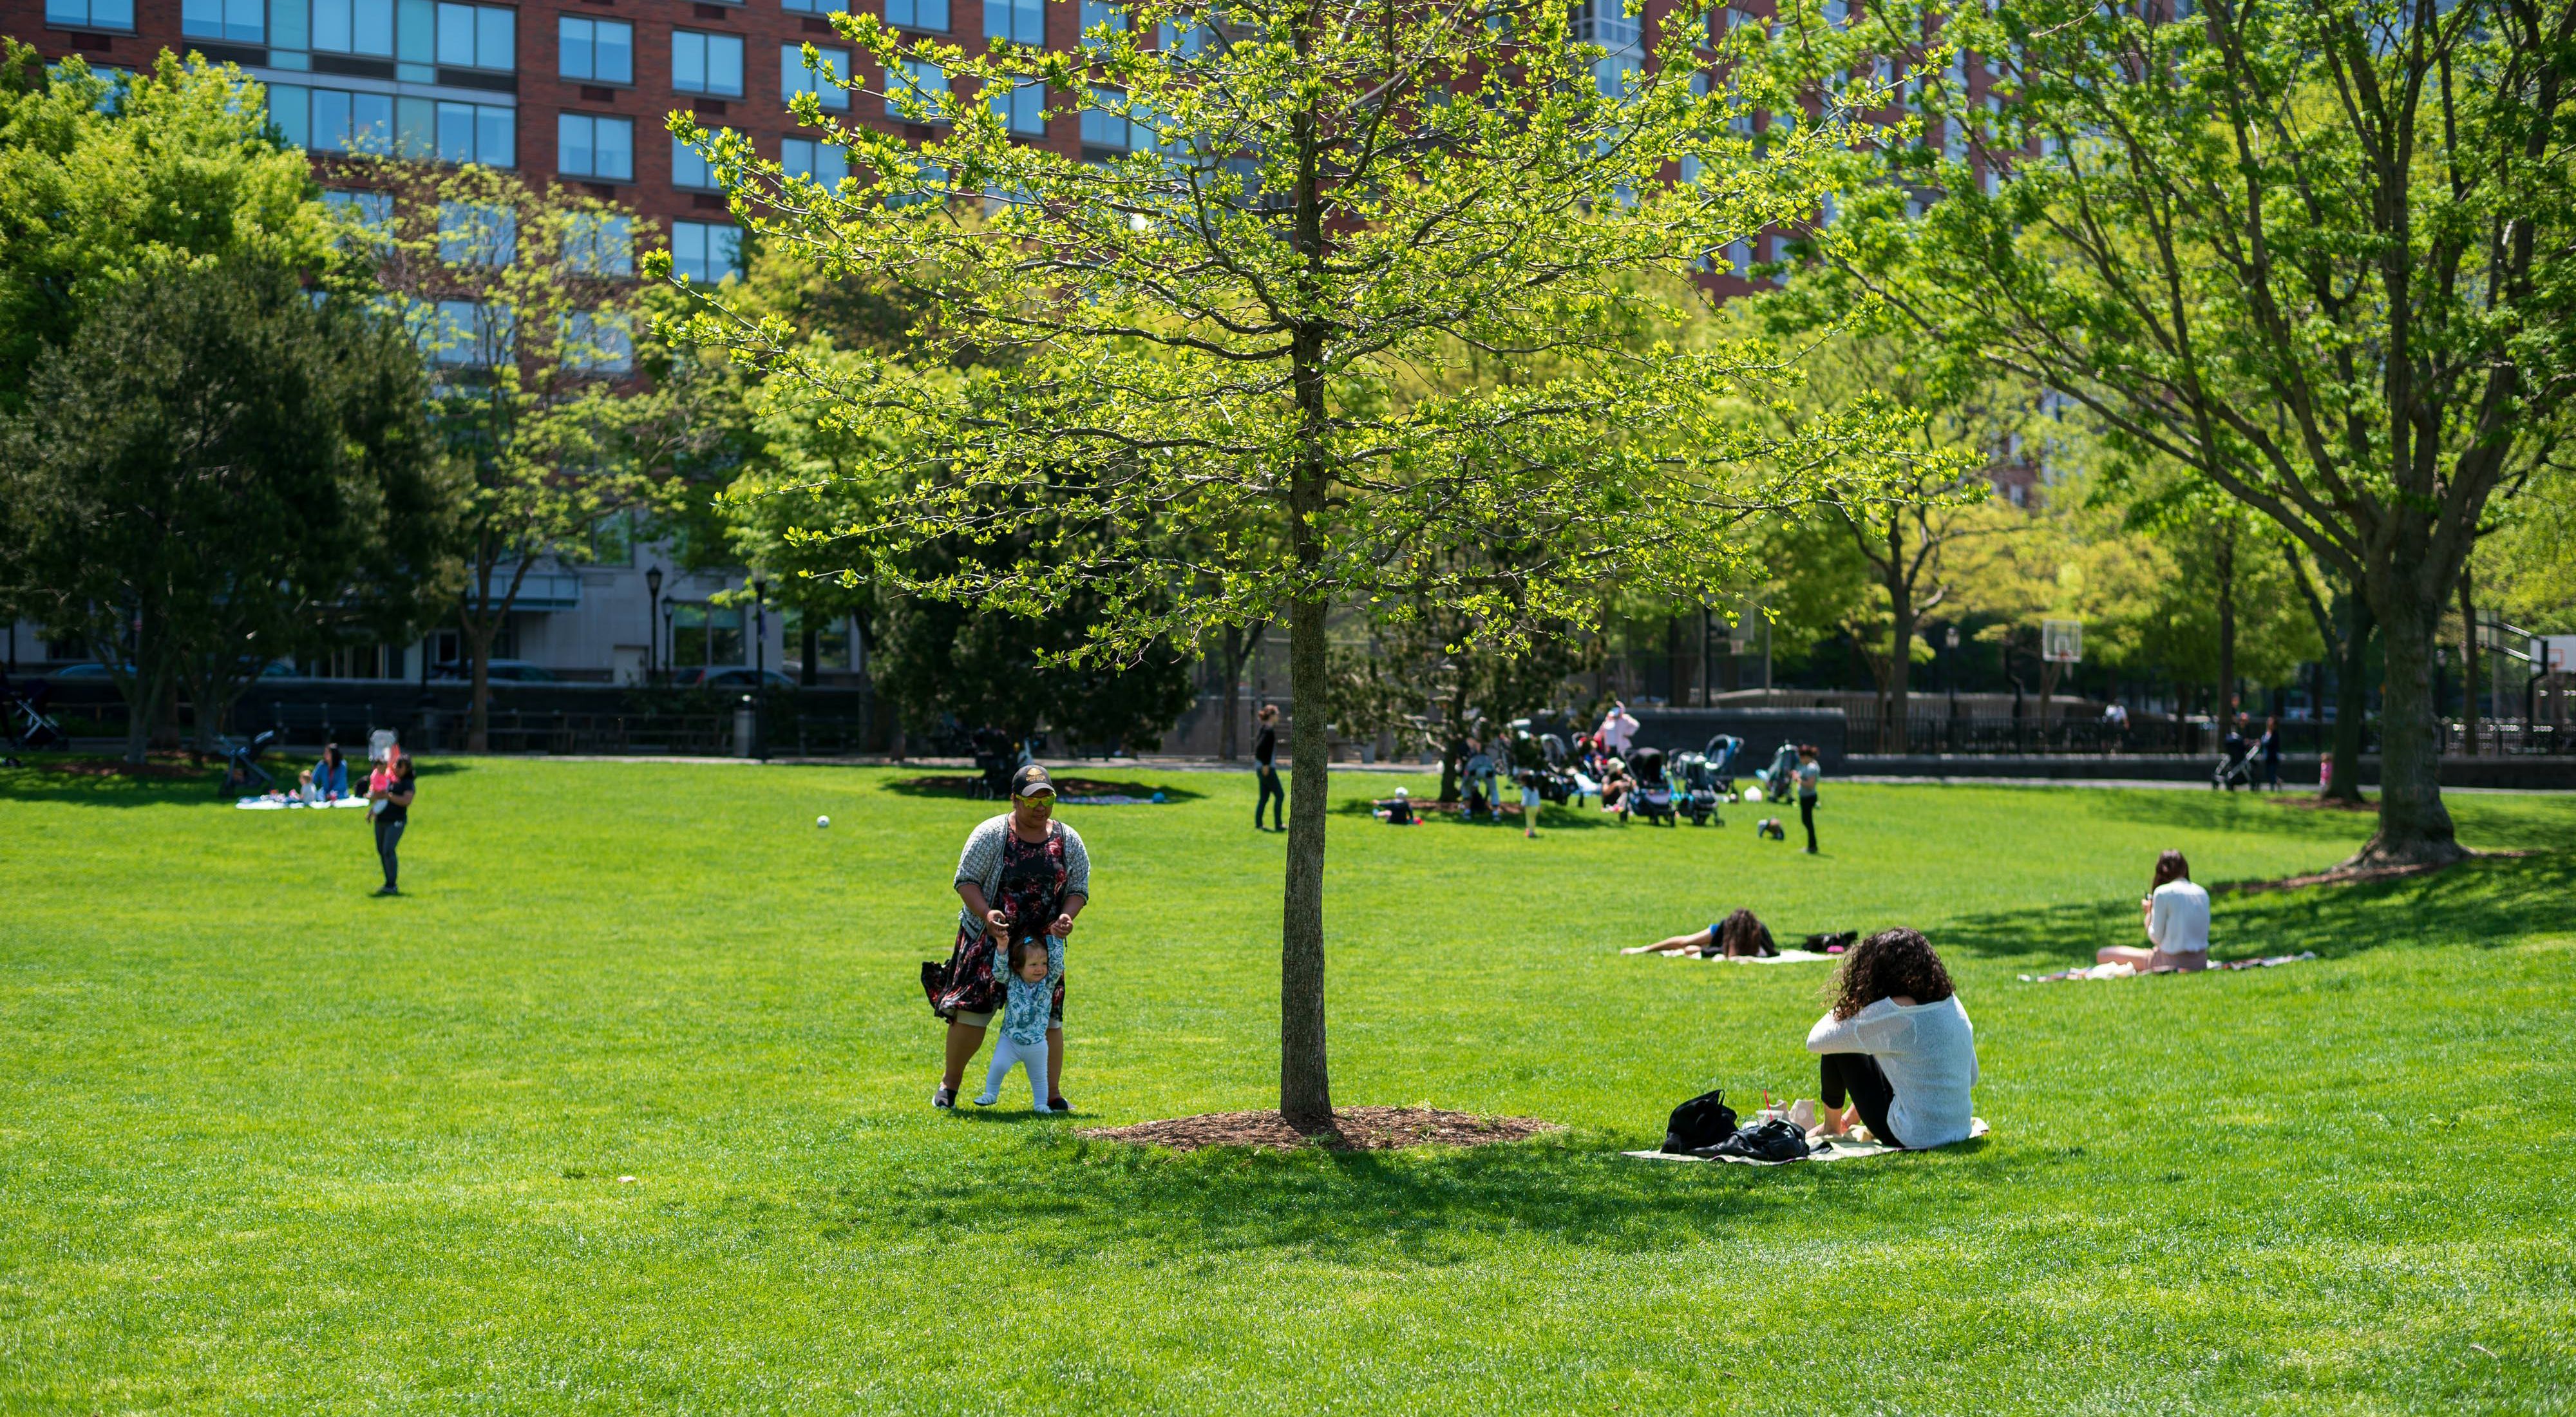 A sunny day in Hudson River Park